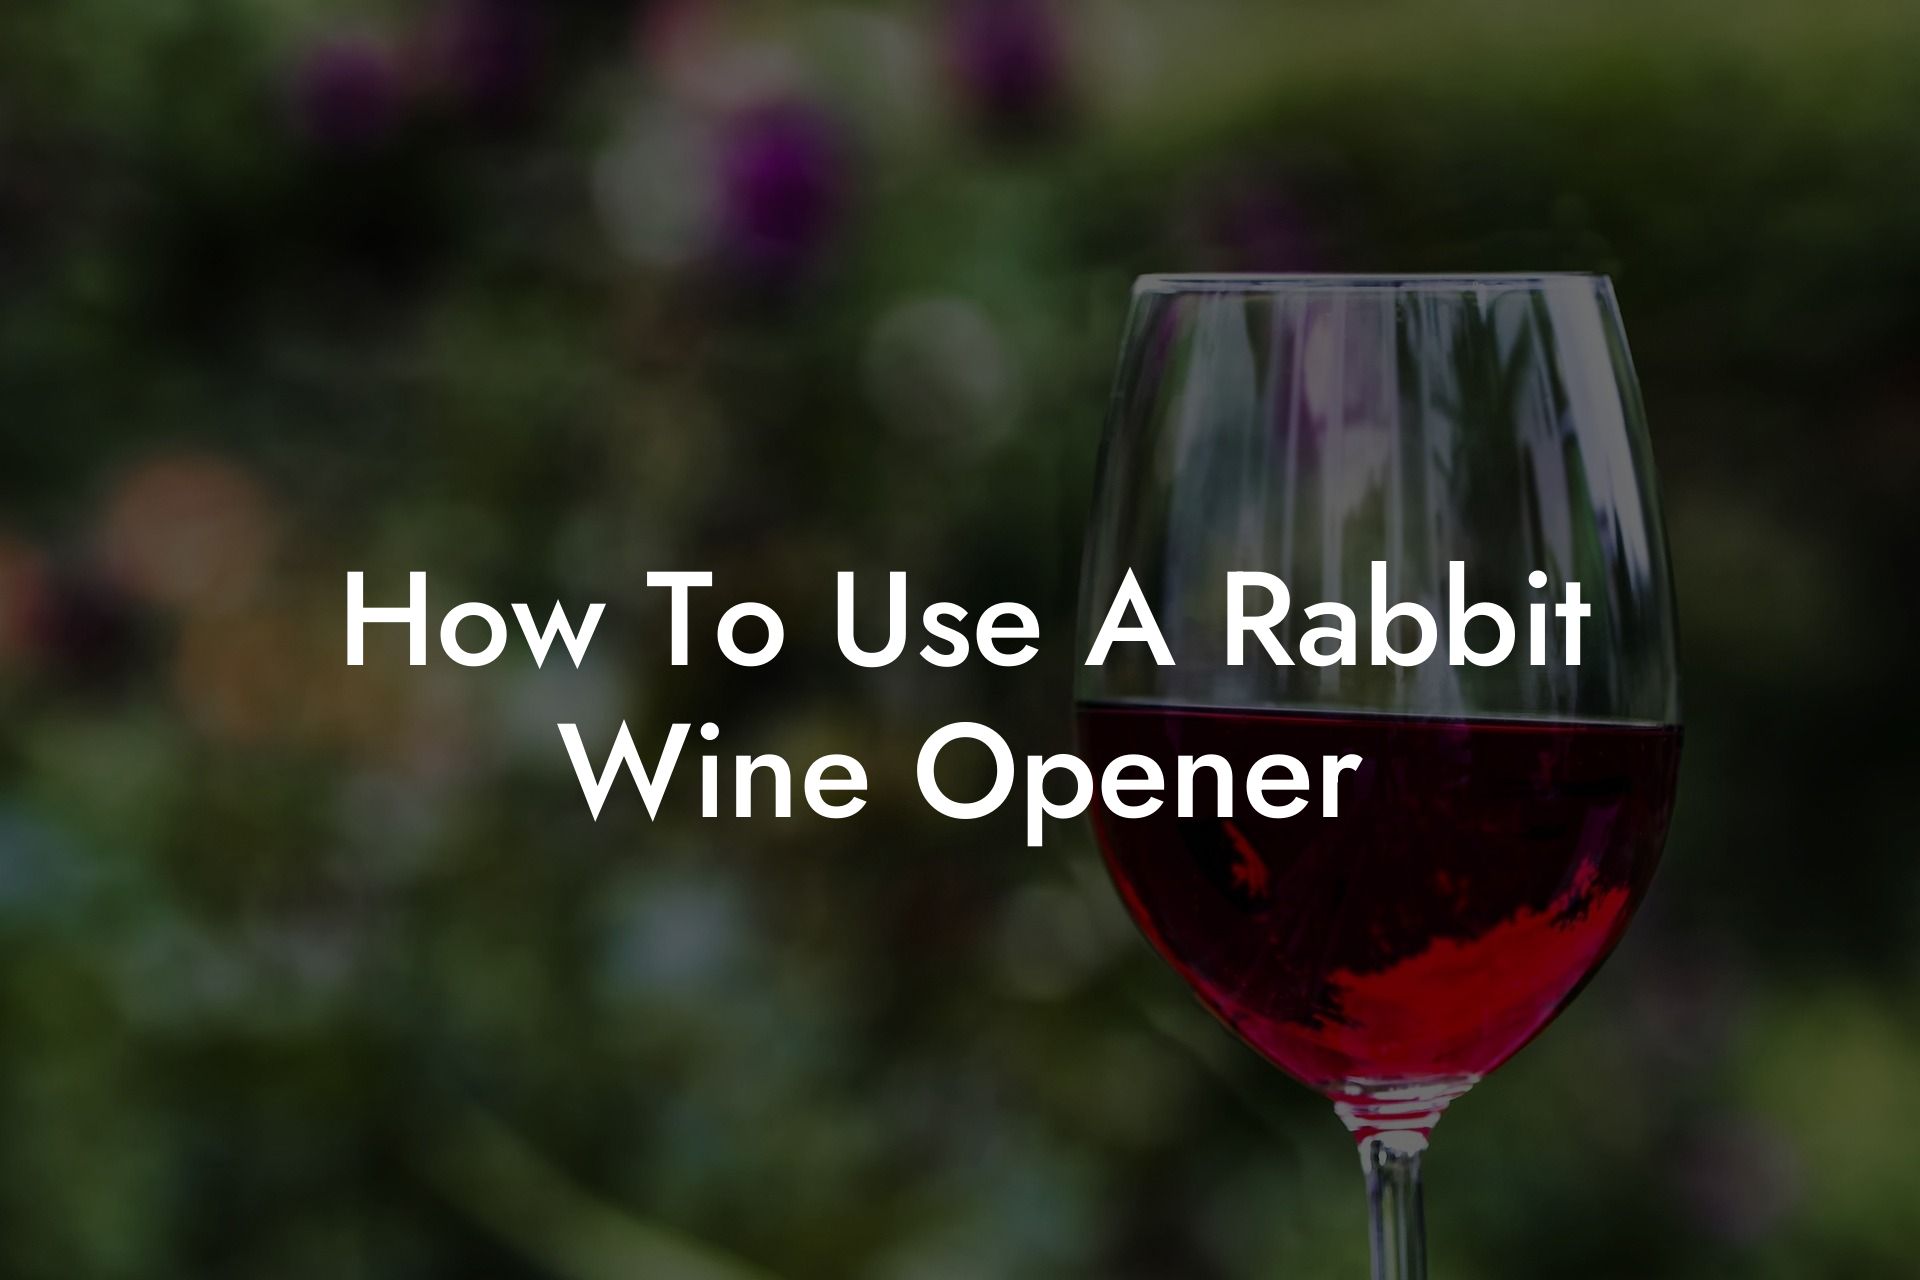 How To Use A Rabbit Wine Opener